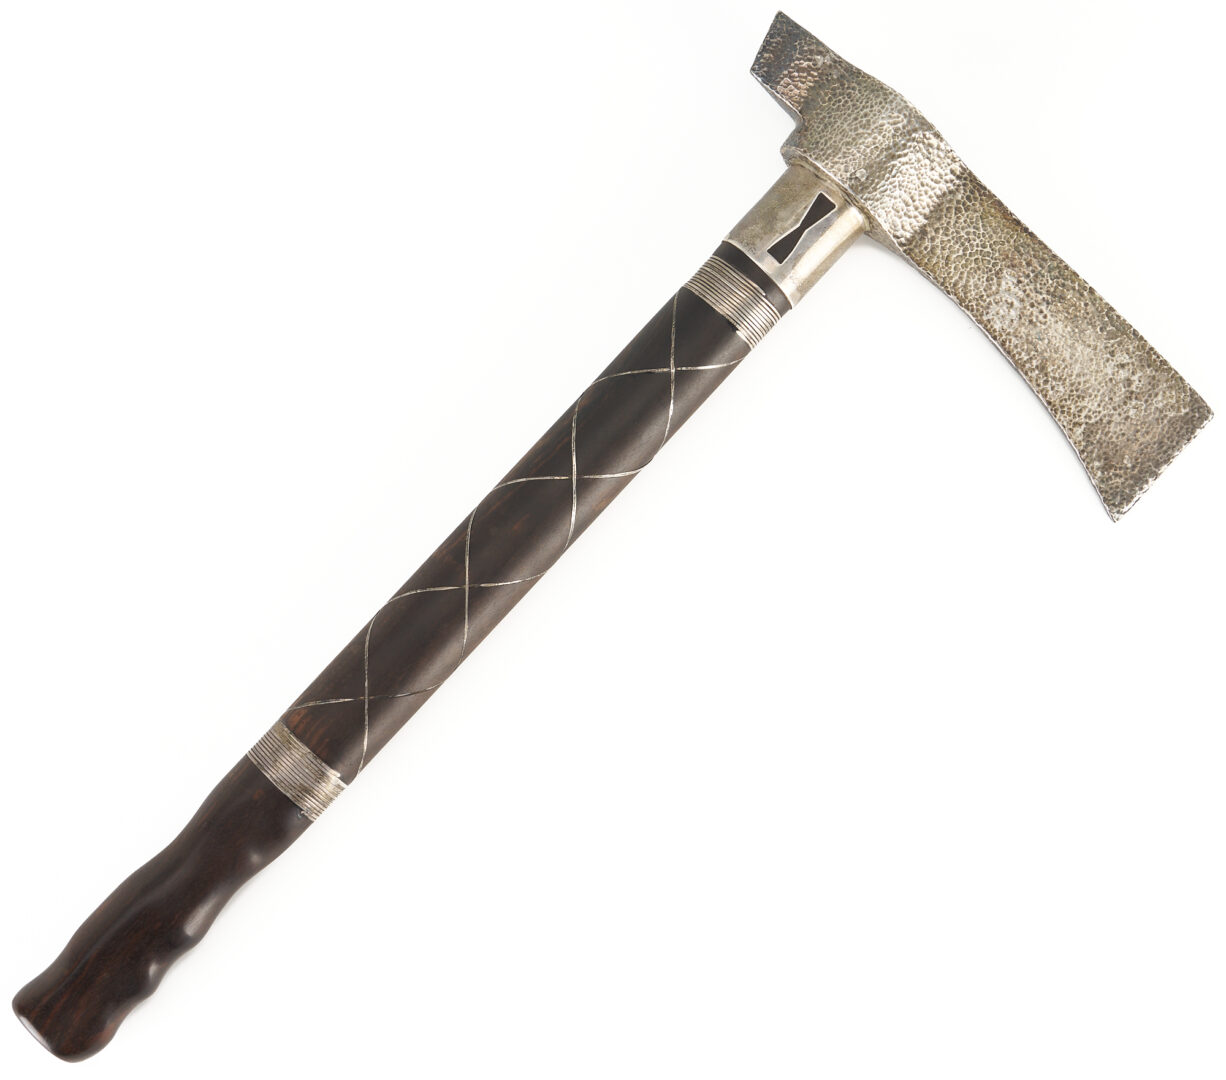 Lot 522: Silver Hatchet with Inlaid Gold Coin